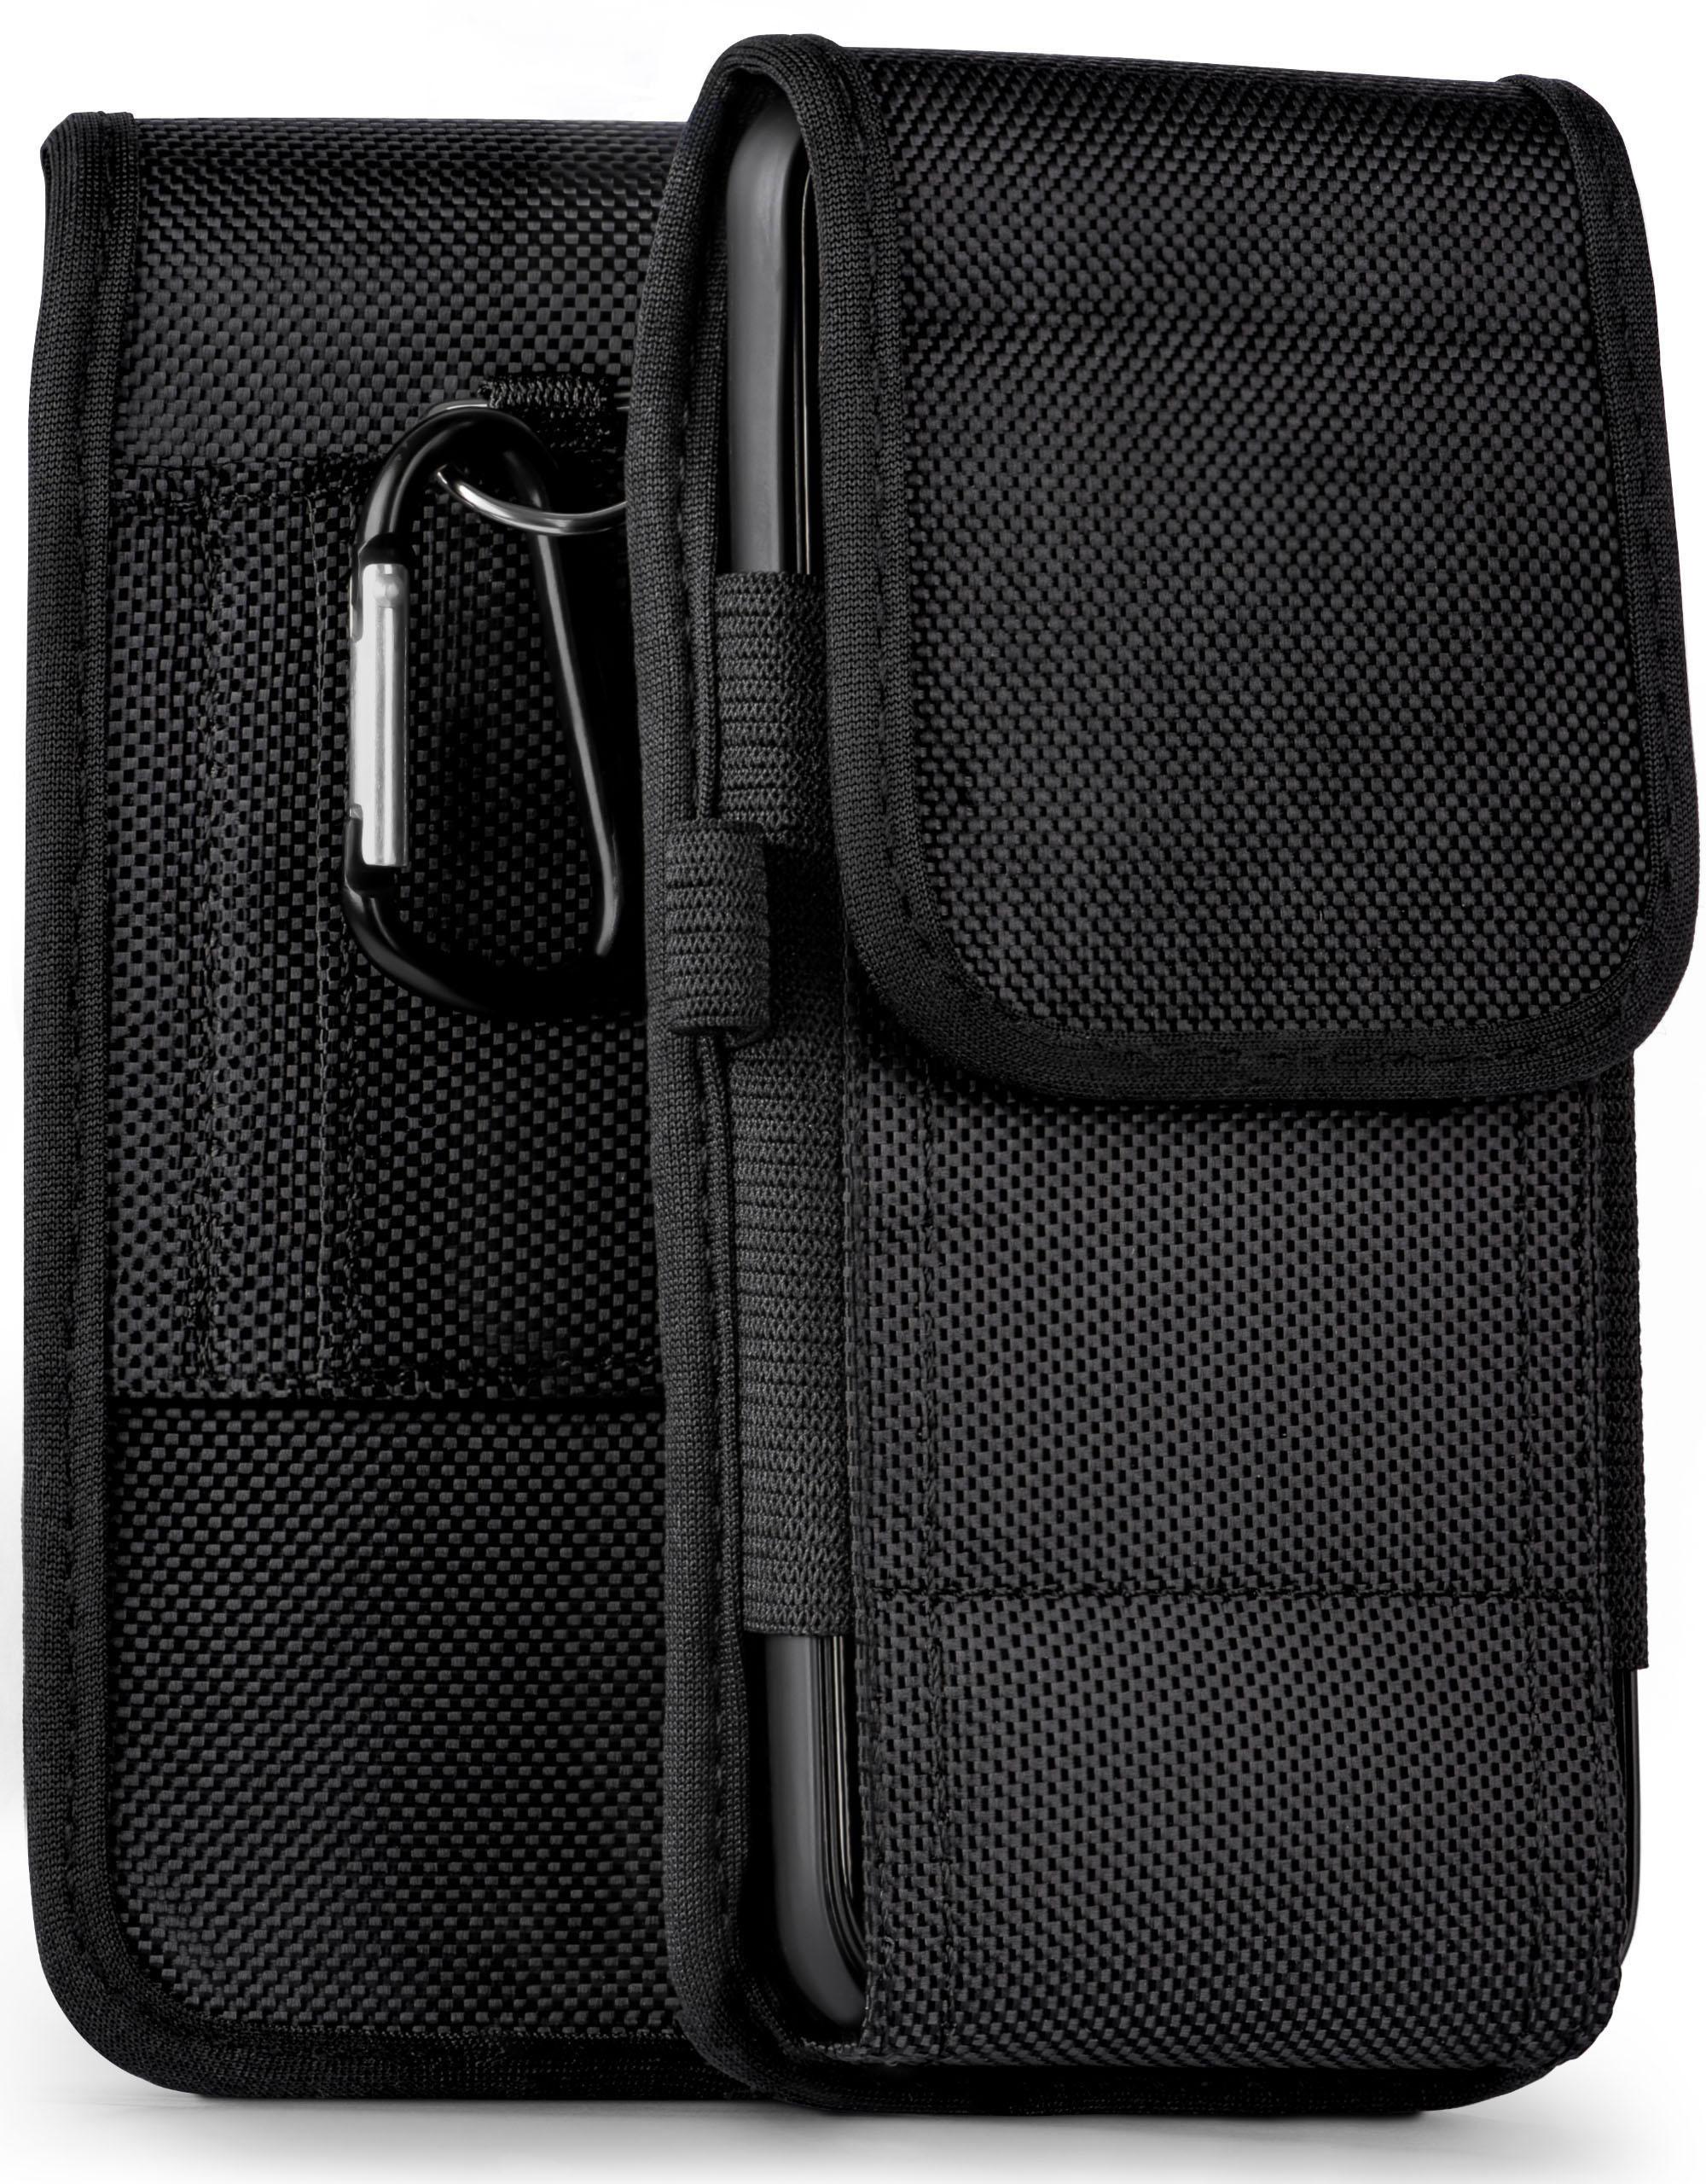 Case, Agility 3T, OnePlus, Holster, MOEX Trail